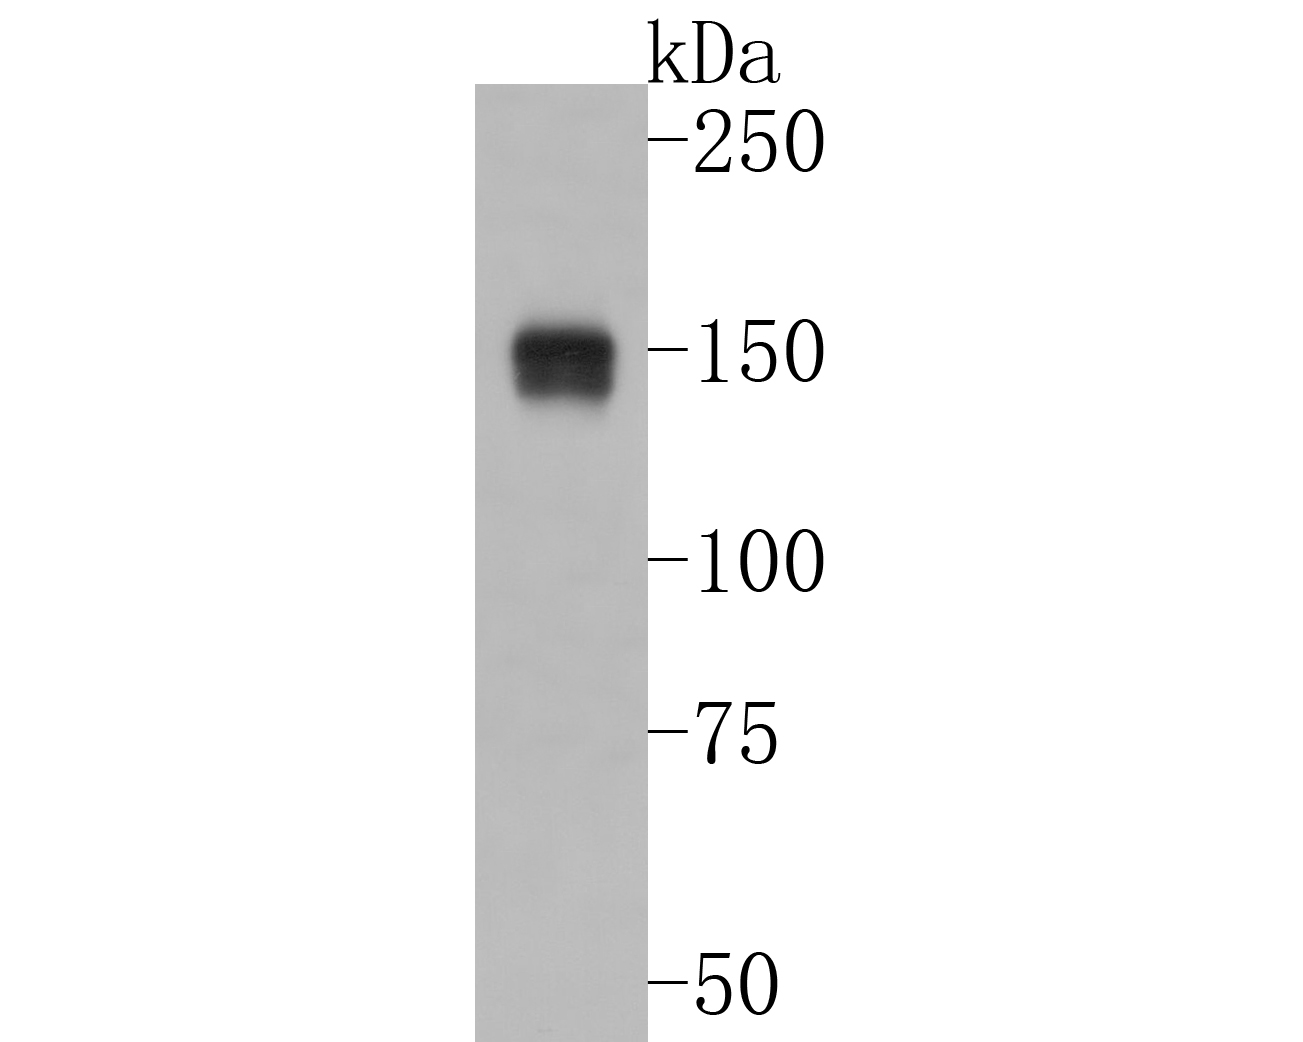 Western blot analysis of ASK1 on 293 cell lysates. Proteins were transferred to a PVDF membrane and blocked with 5% BSA in PBS for 1 hour at room temperature. The primary antibody (ET1608-54, 1/500) was used in 5% BSA at room temperature for 2 hours. Goat Anti-Rabbit IgG - HRP Secondary Antibody (HA1001) at 1:5,000 dilution was used for 1 hour at room temperature.